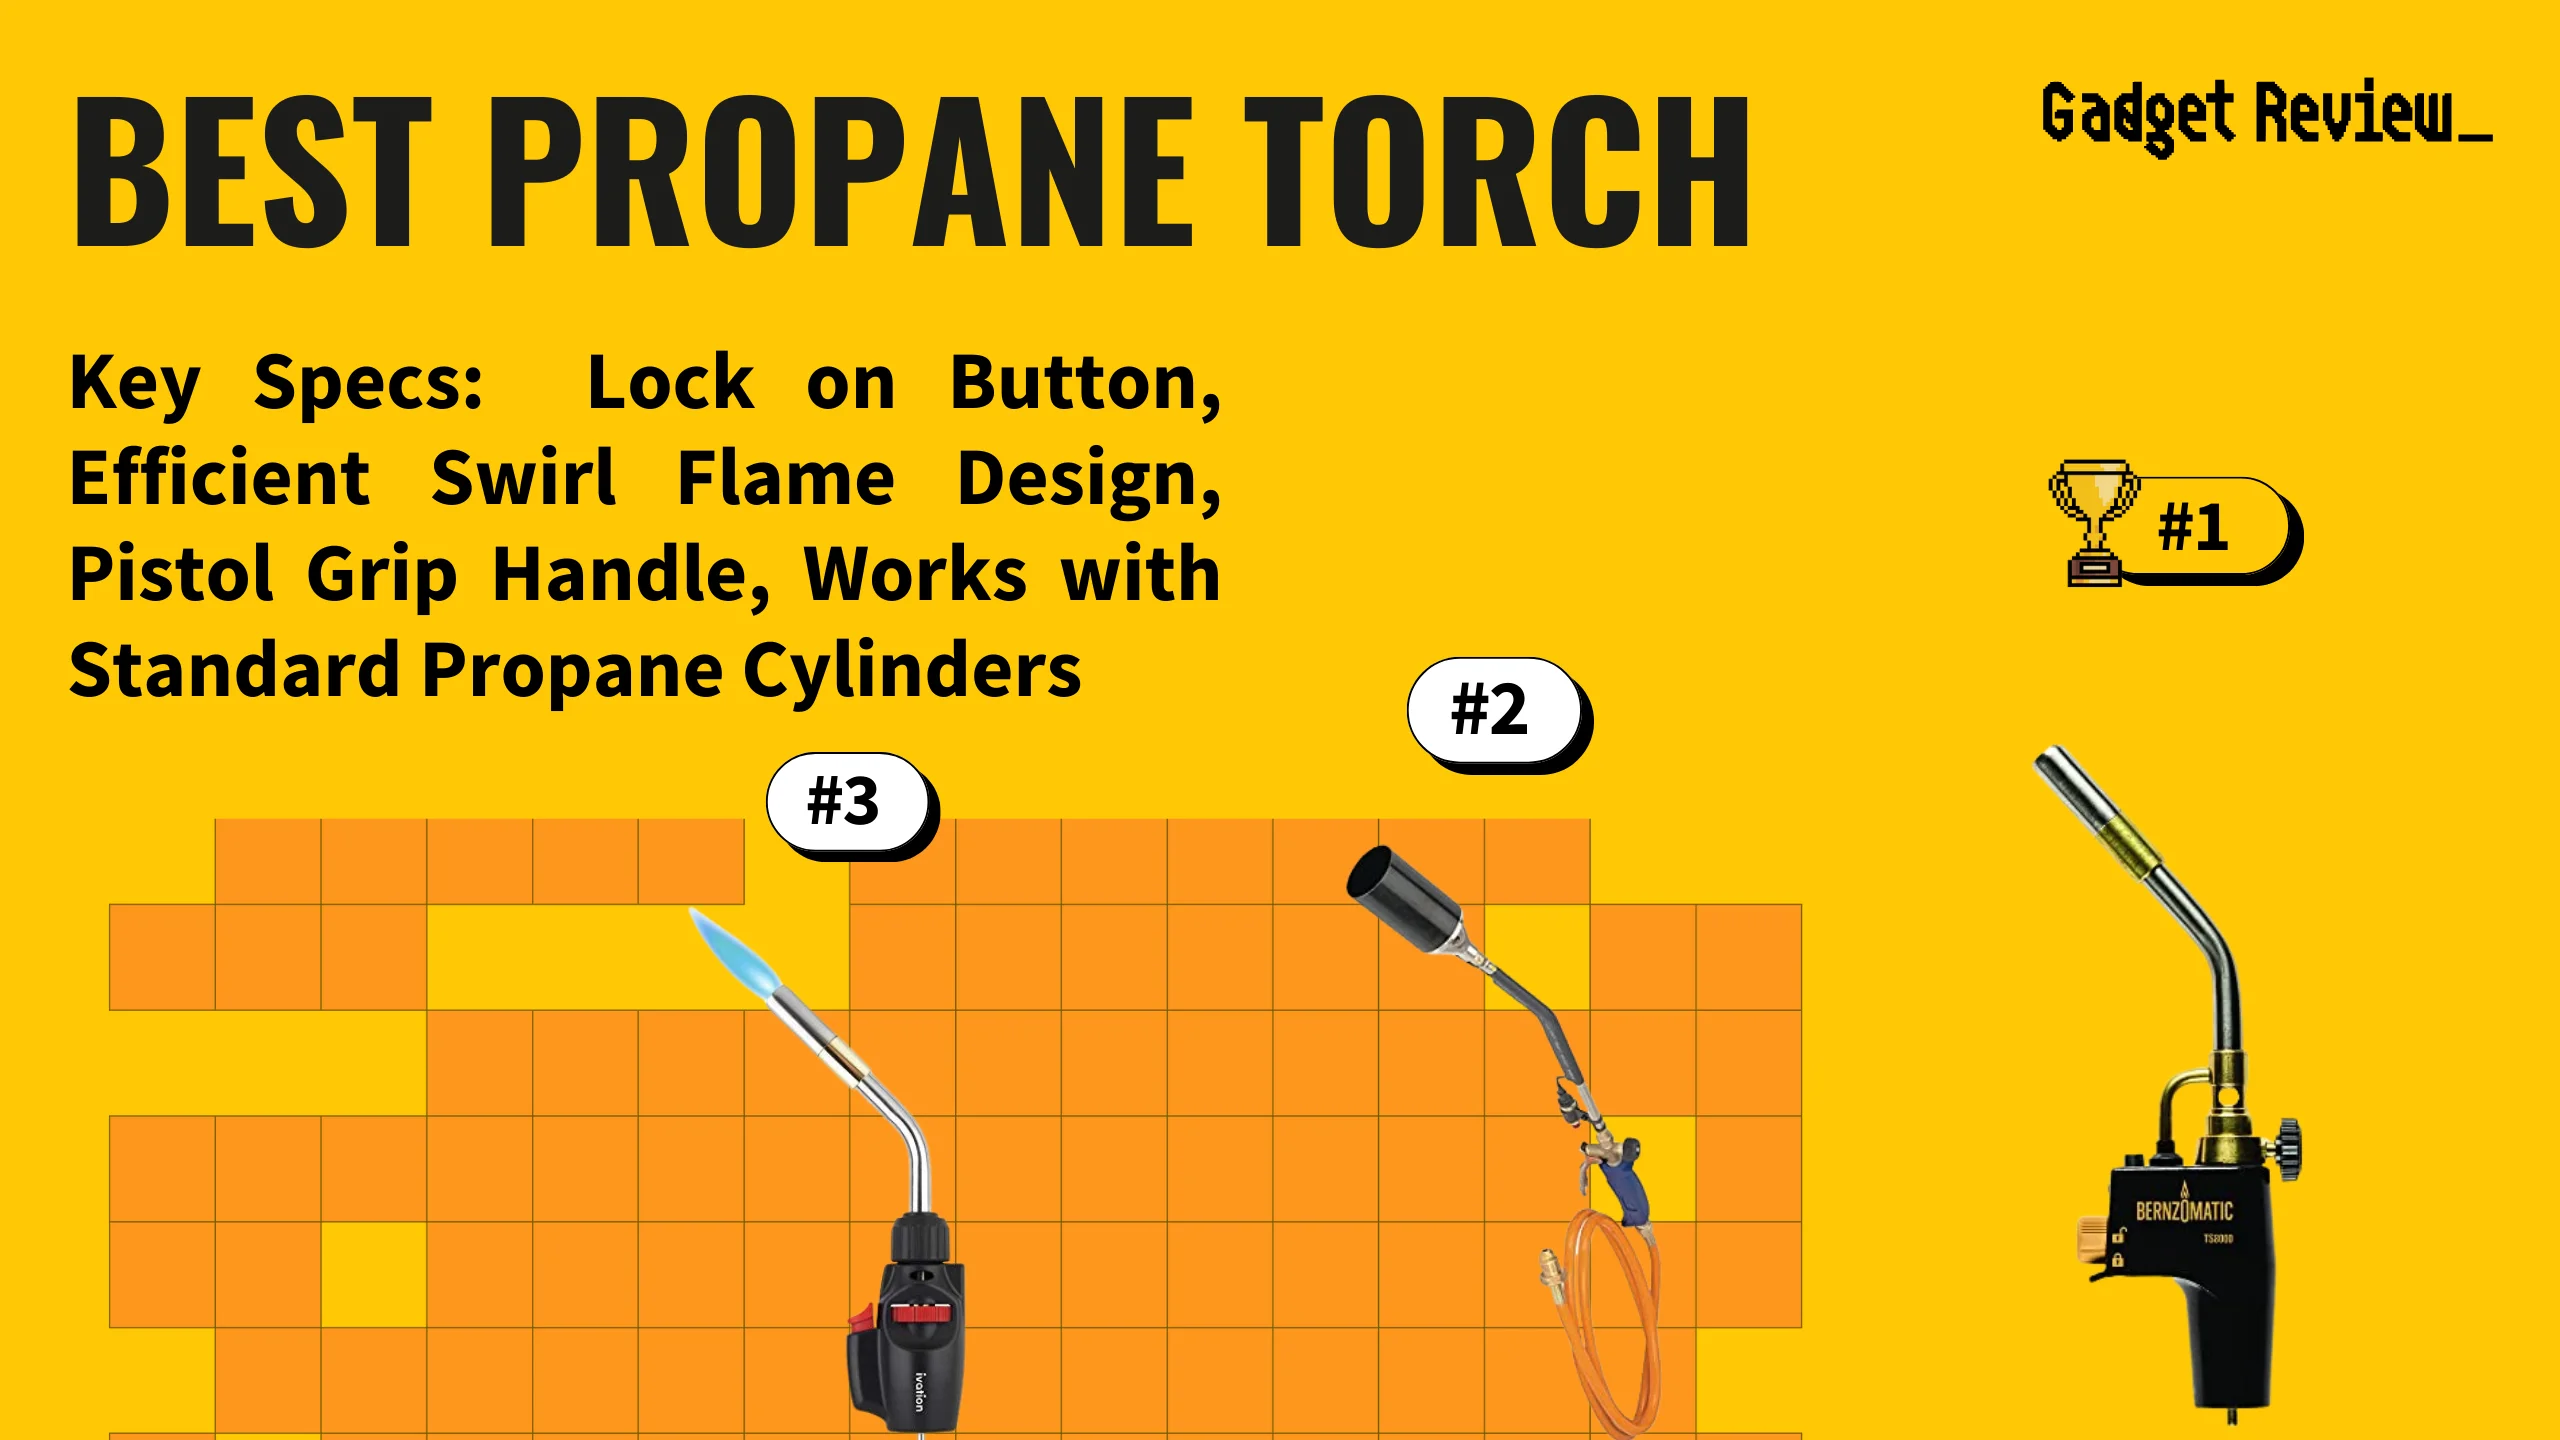 best propane torch featured image that shows the top three best tool models